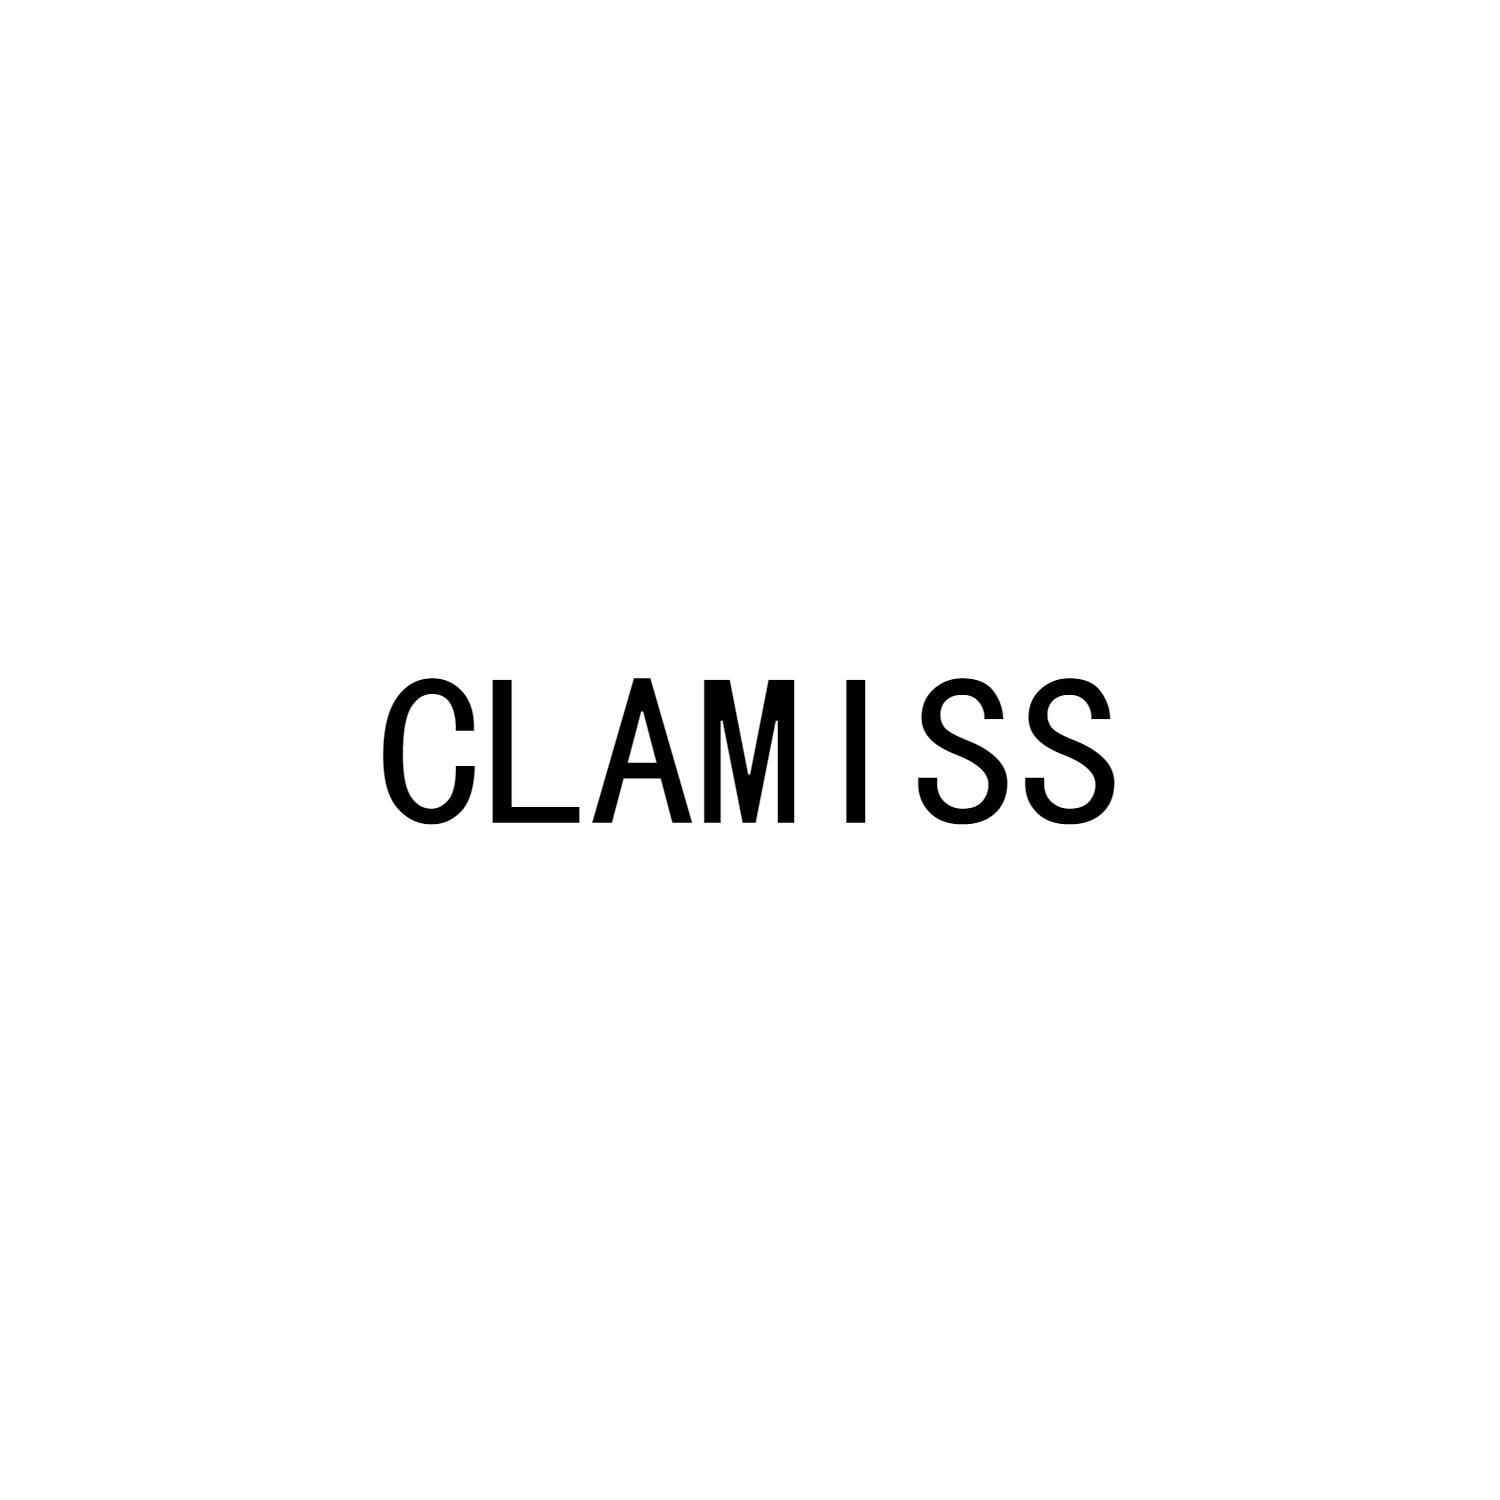 CLAMISS